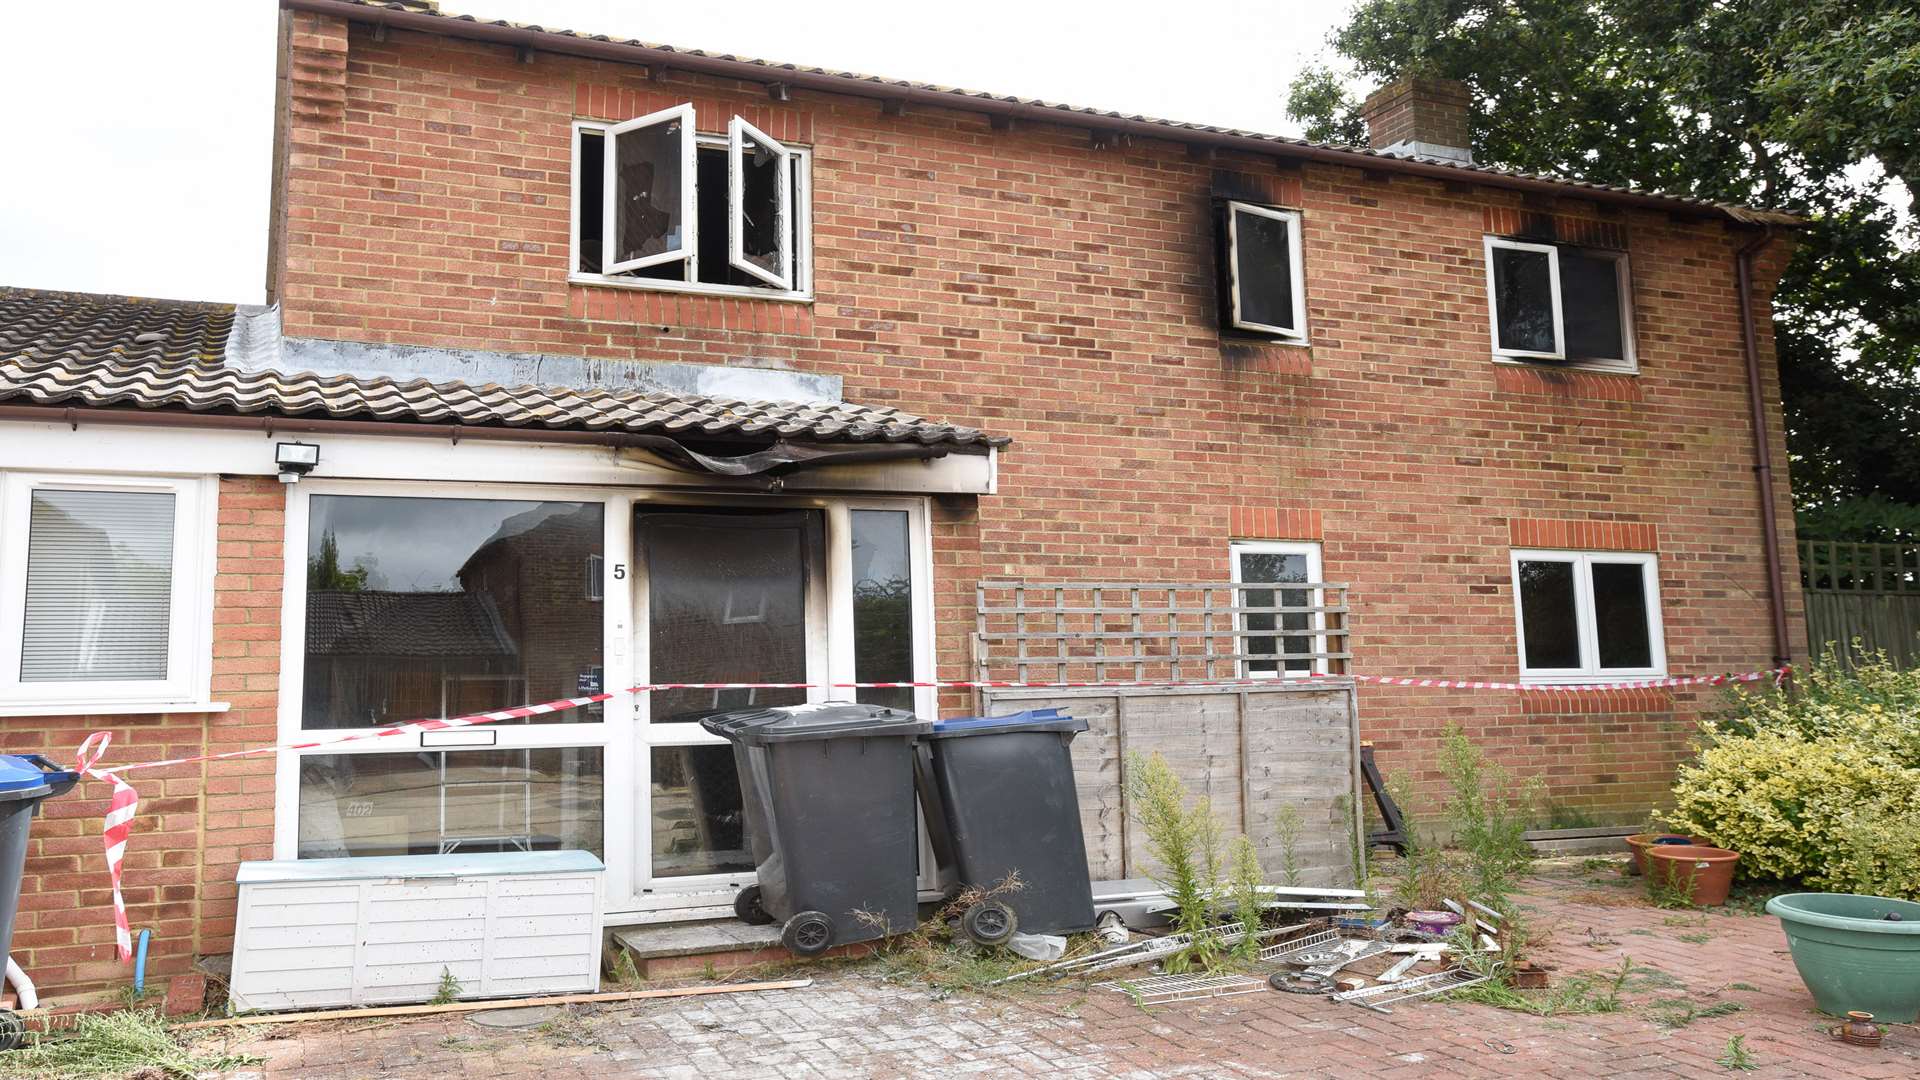 The house was left severely damaged after a fire